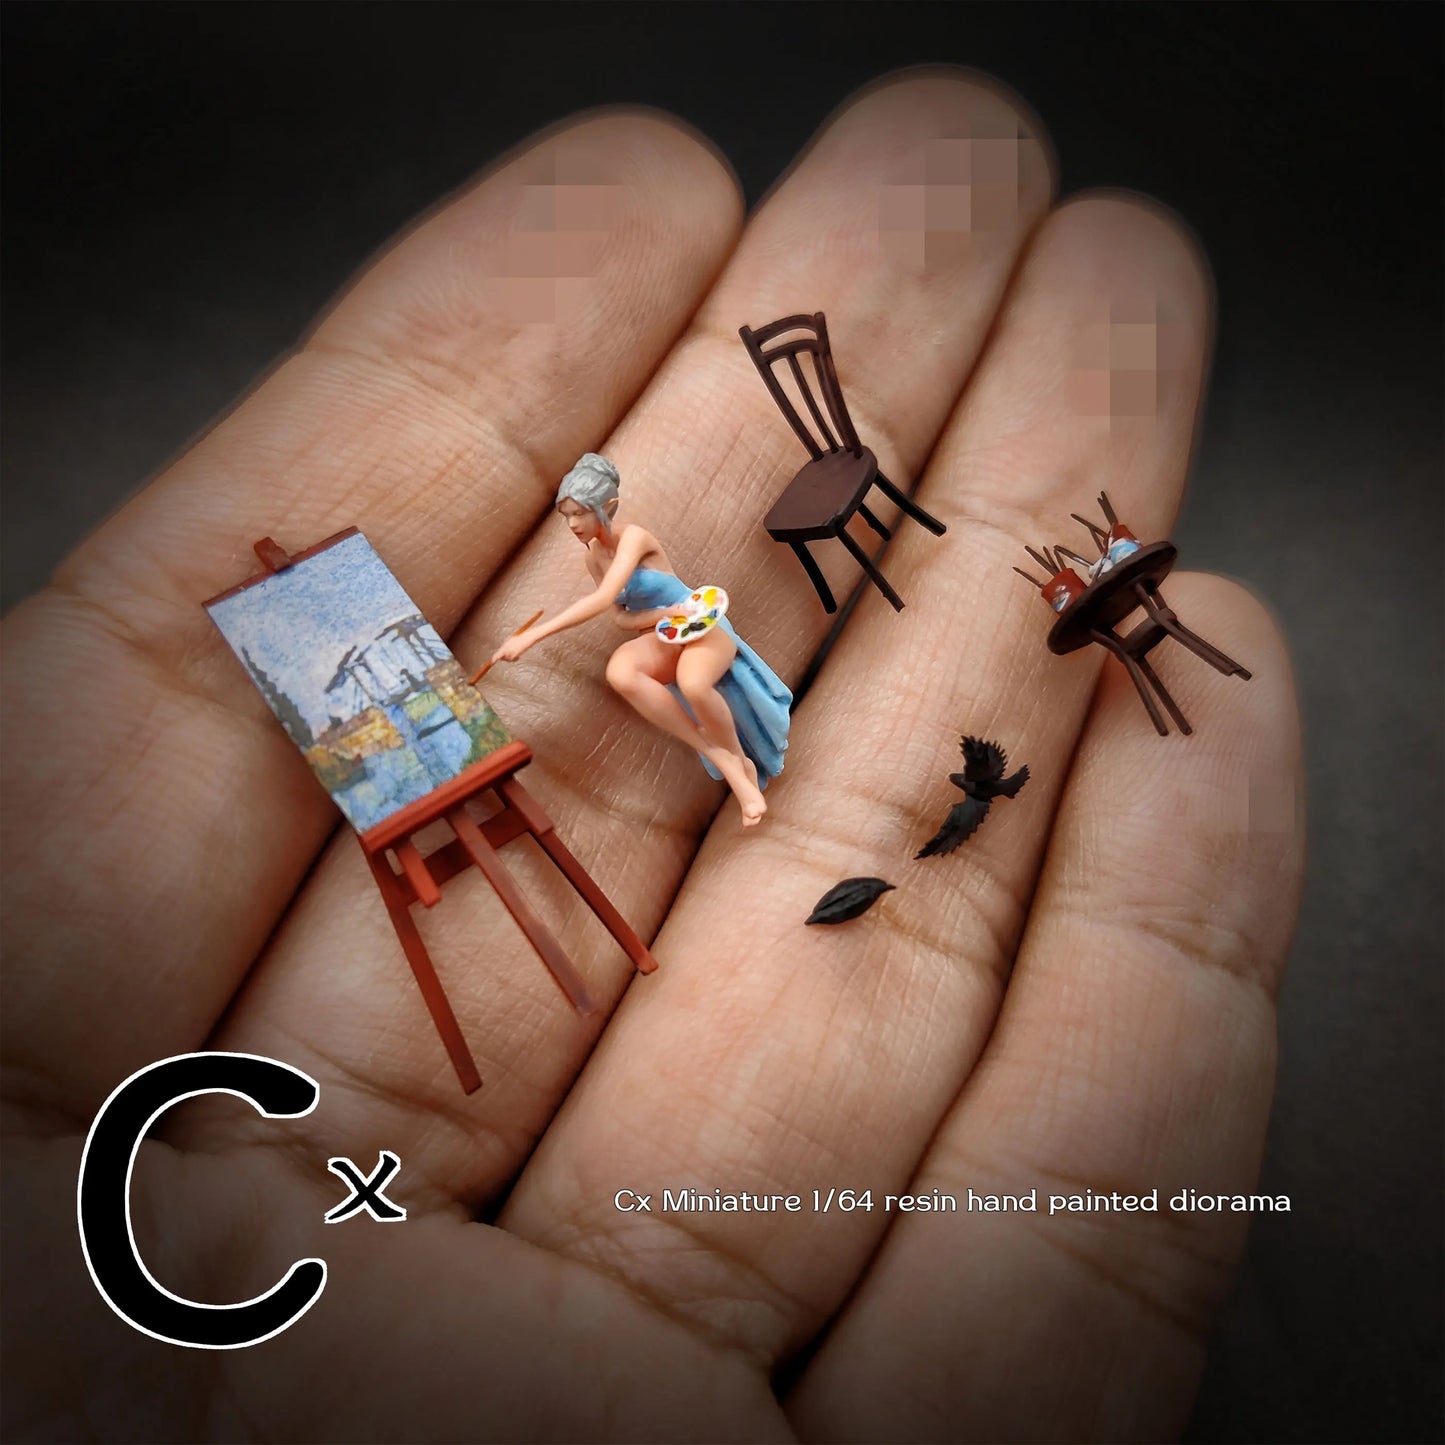 Cx Miniature Diorama 1/64 Scale Figurines Model Paintings of Ice Princess Collection Miniature Hand-painted